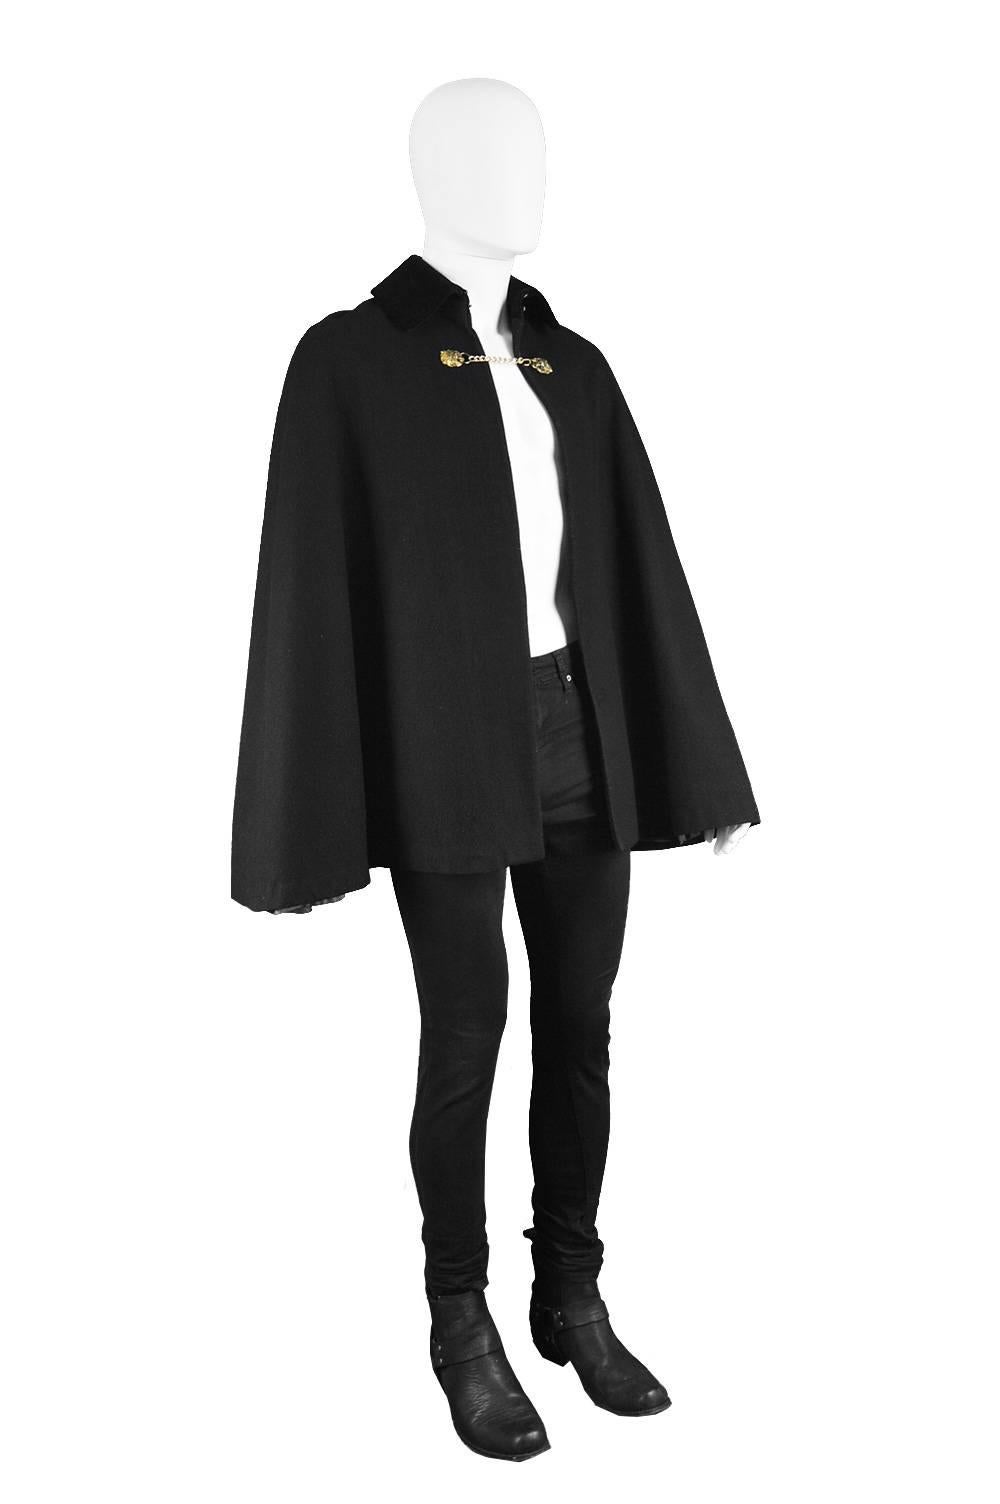 Mister Carnaby Men's Vintage 1960s Black Wool Velvet Collar Cape Coat 

Size: Best fits men's Small to Large.
Chest - Free
Length (Shoulder to Hem) - 29” / 73cm
Shoulder to Shoulder - 18” / 46cm
Please note: The hook and eye fastenings at the Collar